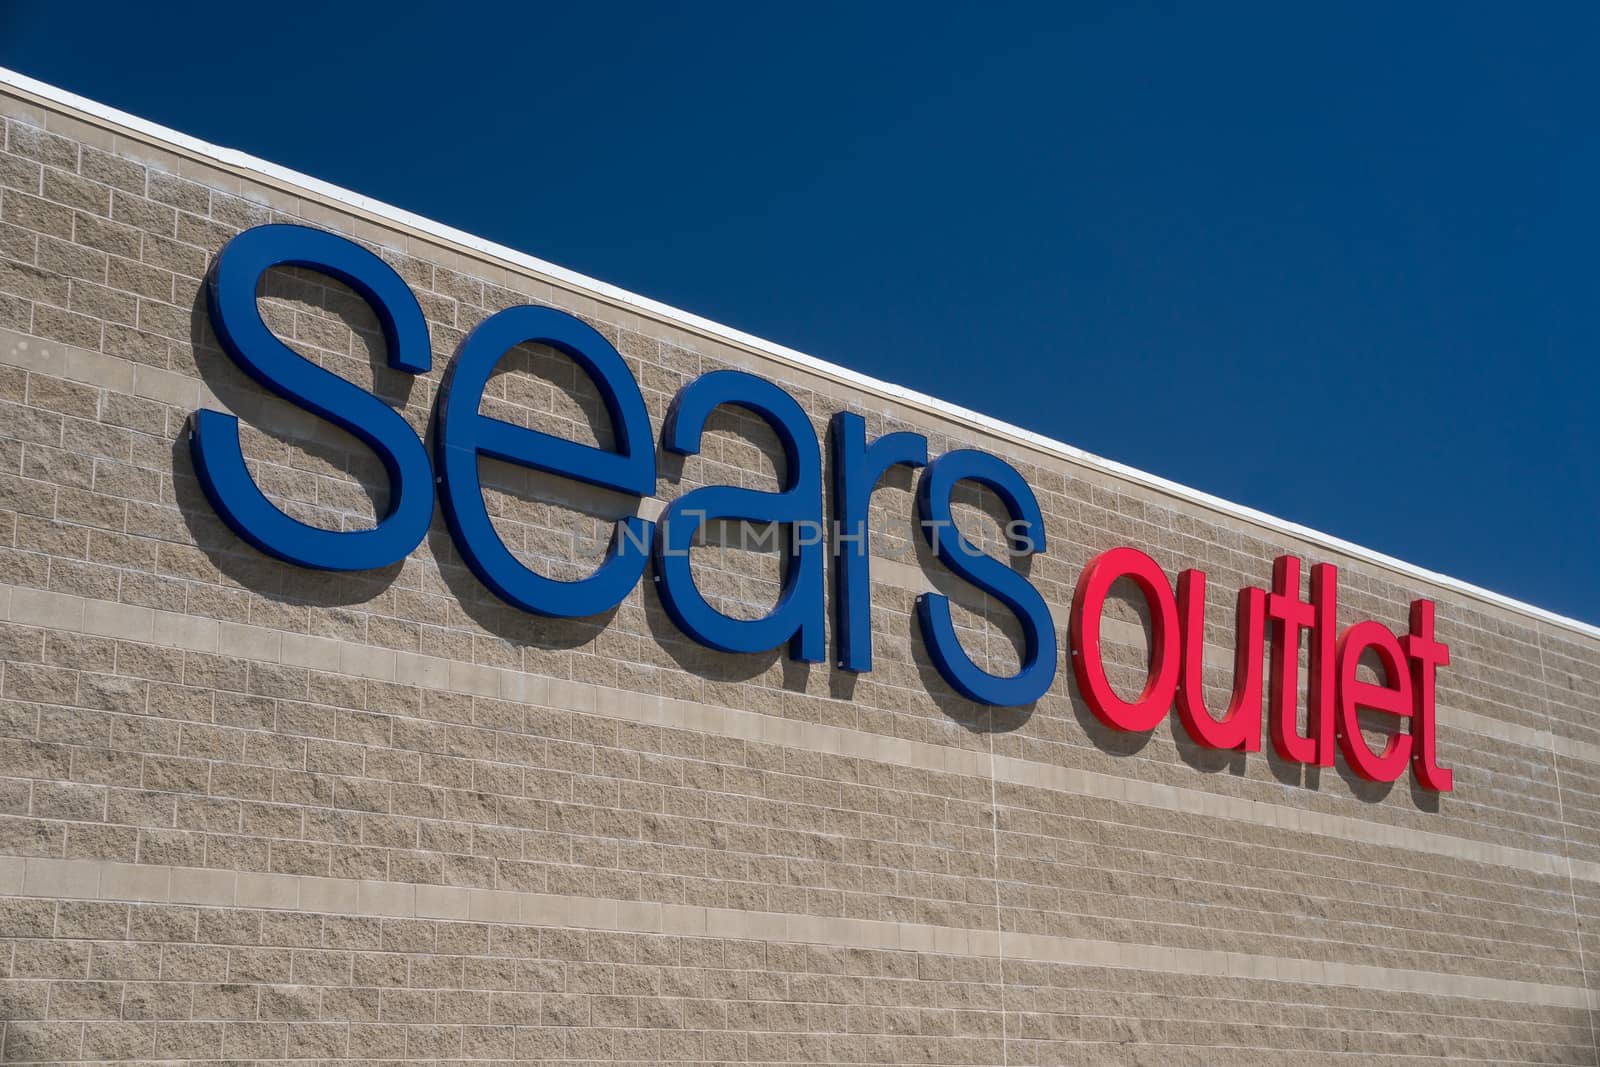 Sears Outlet Exterior and Sign by wolterk